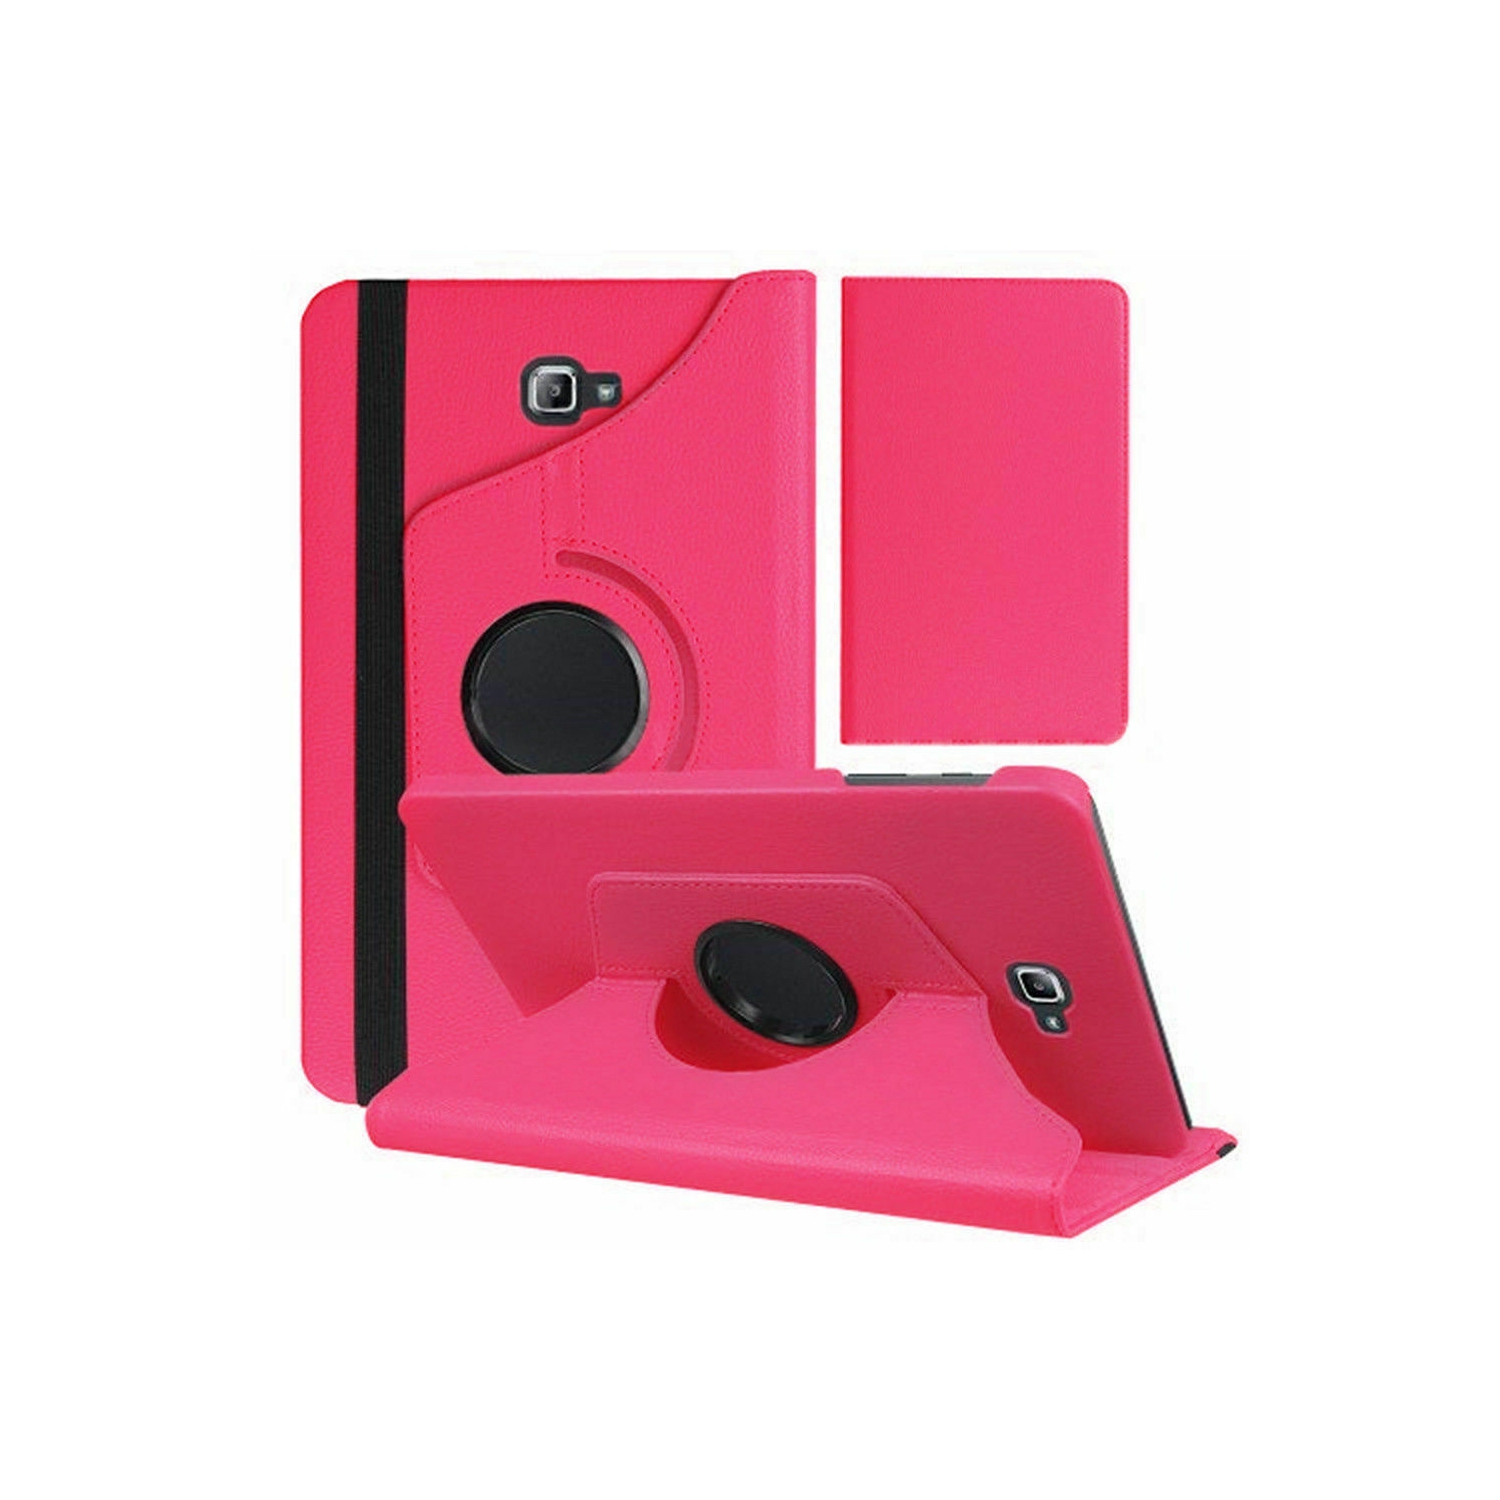 【CSmart】 360 Rotating Leather Tablet Case Smart Stand Cover for Samsung Tab A 10.1" T580 T585, Hot Pink